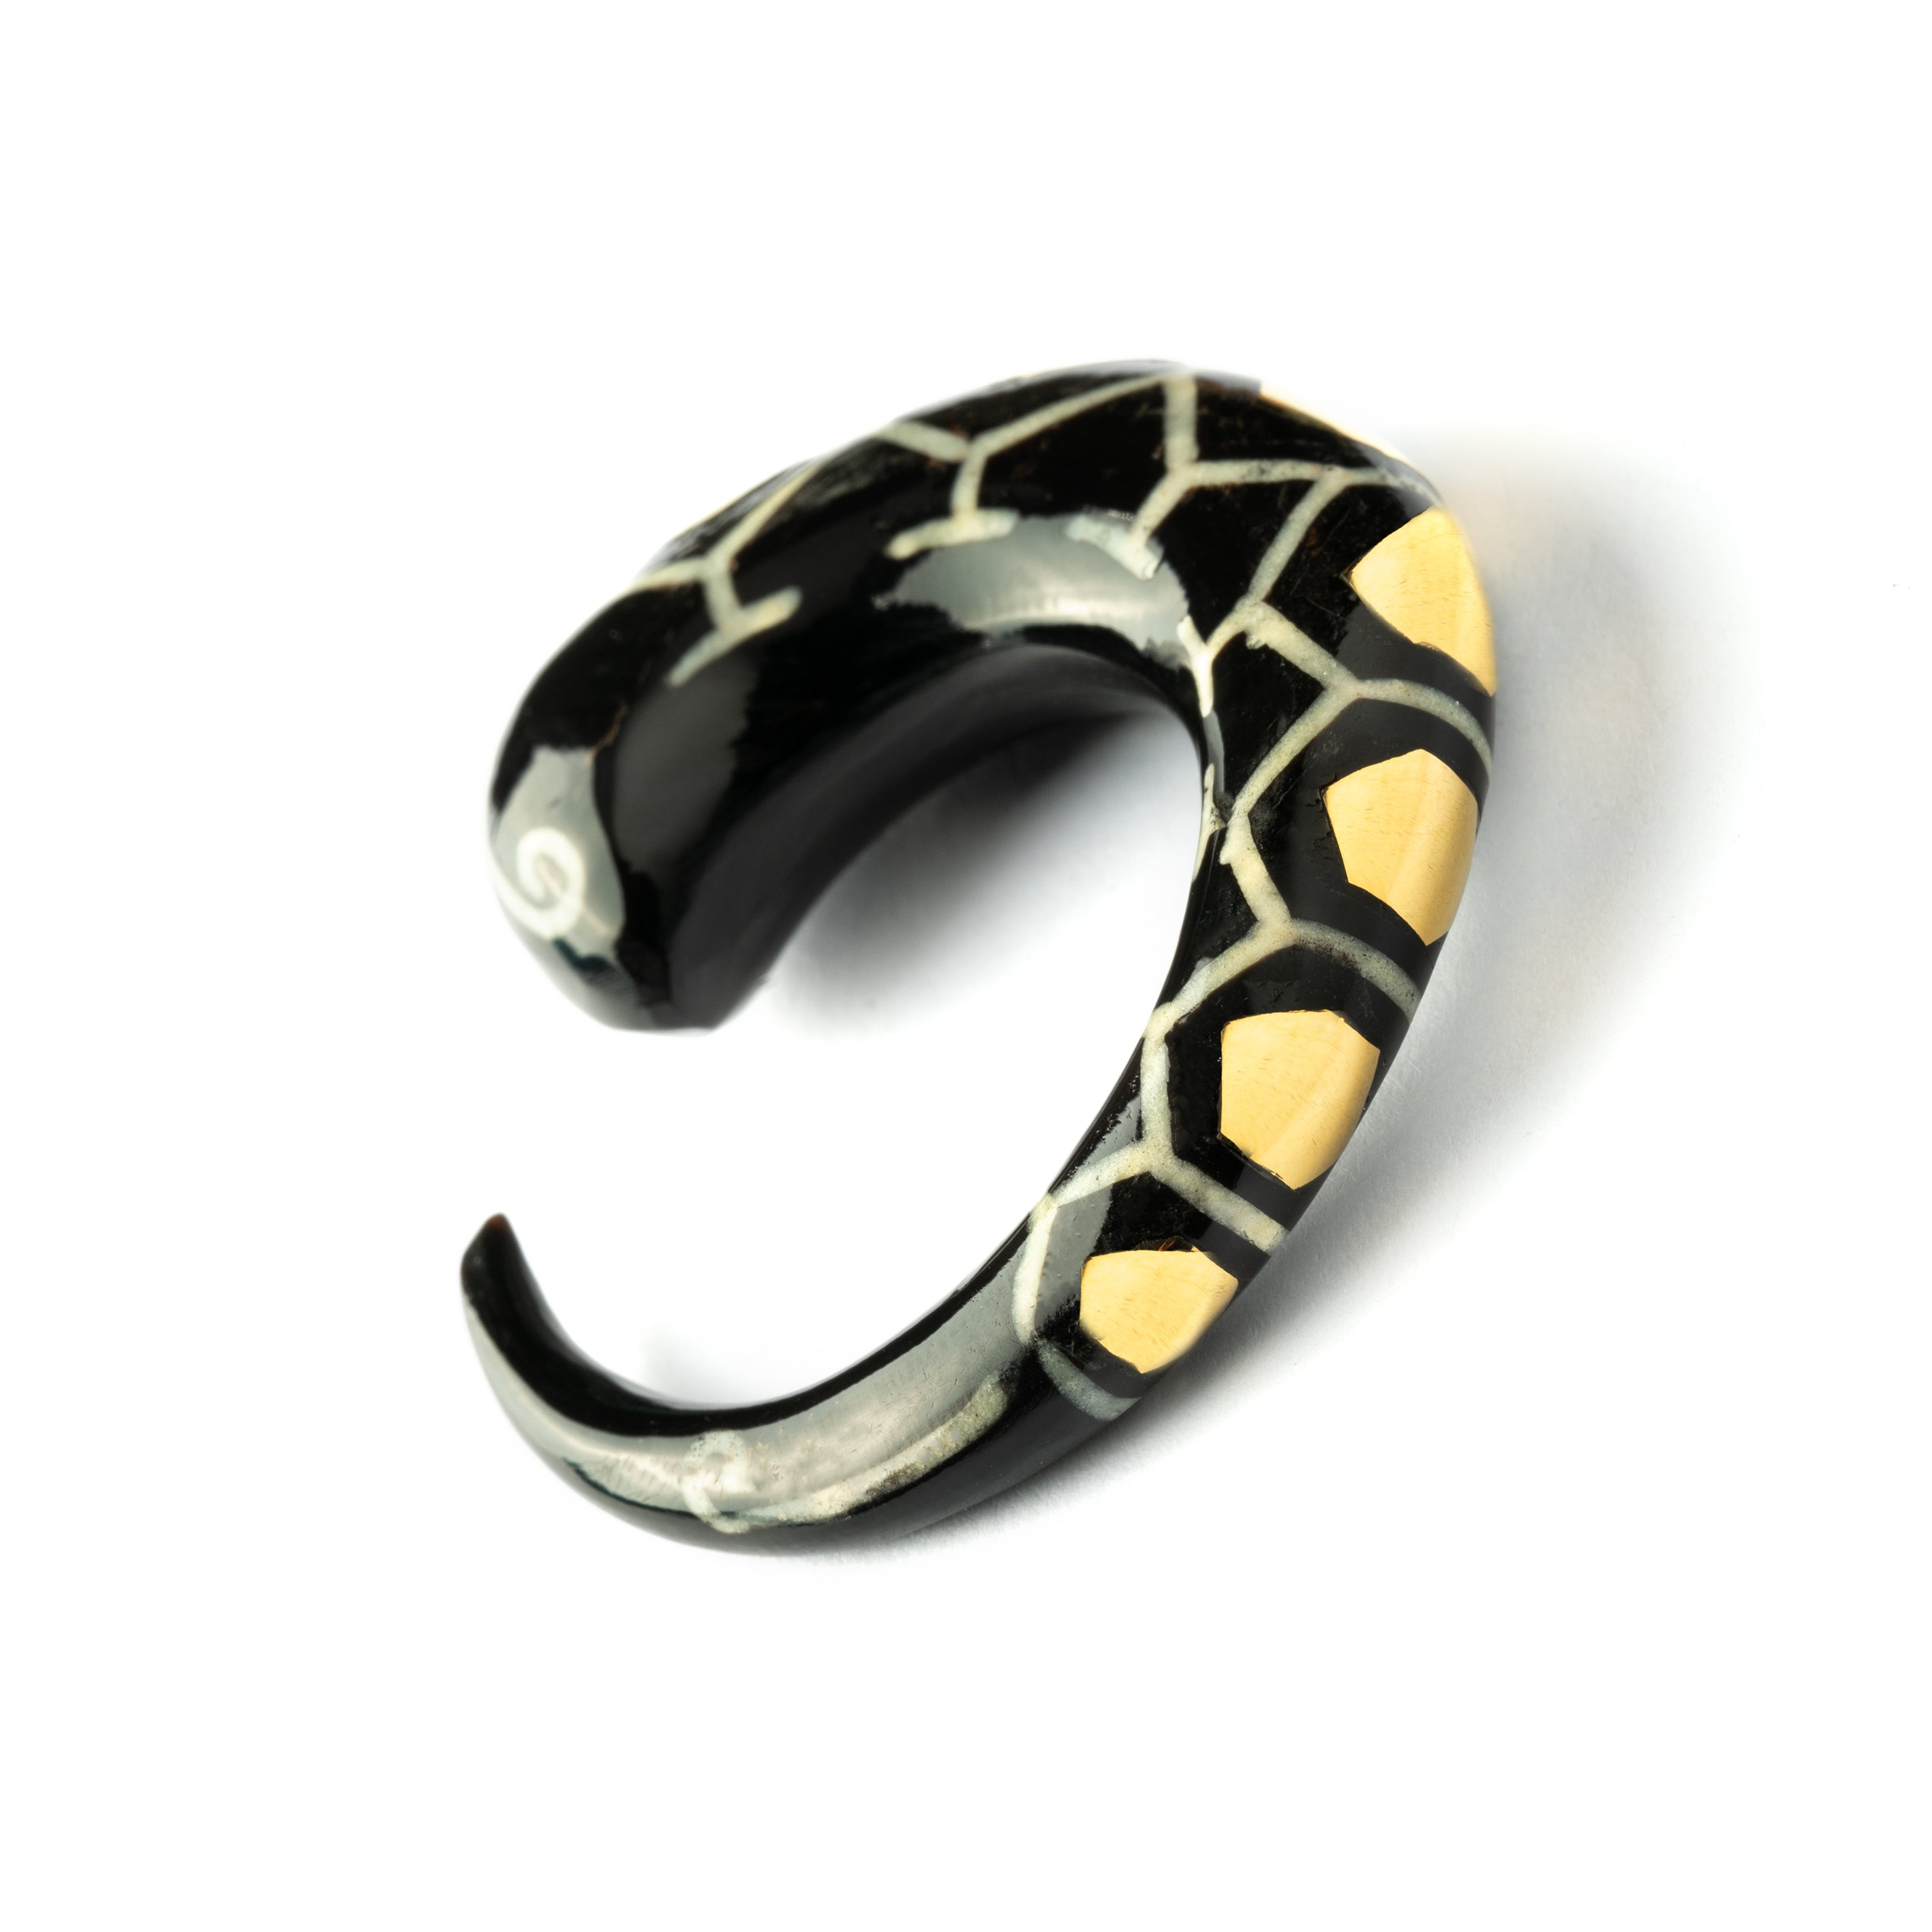 single horn ear stretcher with brass hexagons, curved hook shaped back view